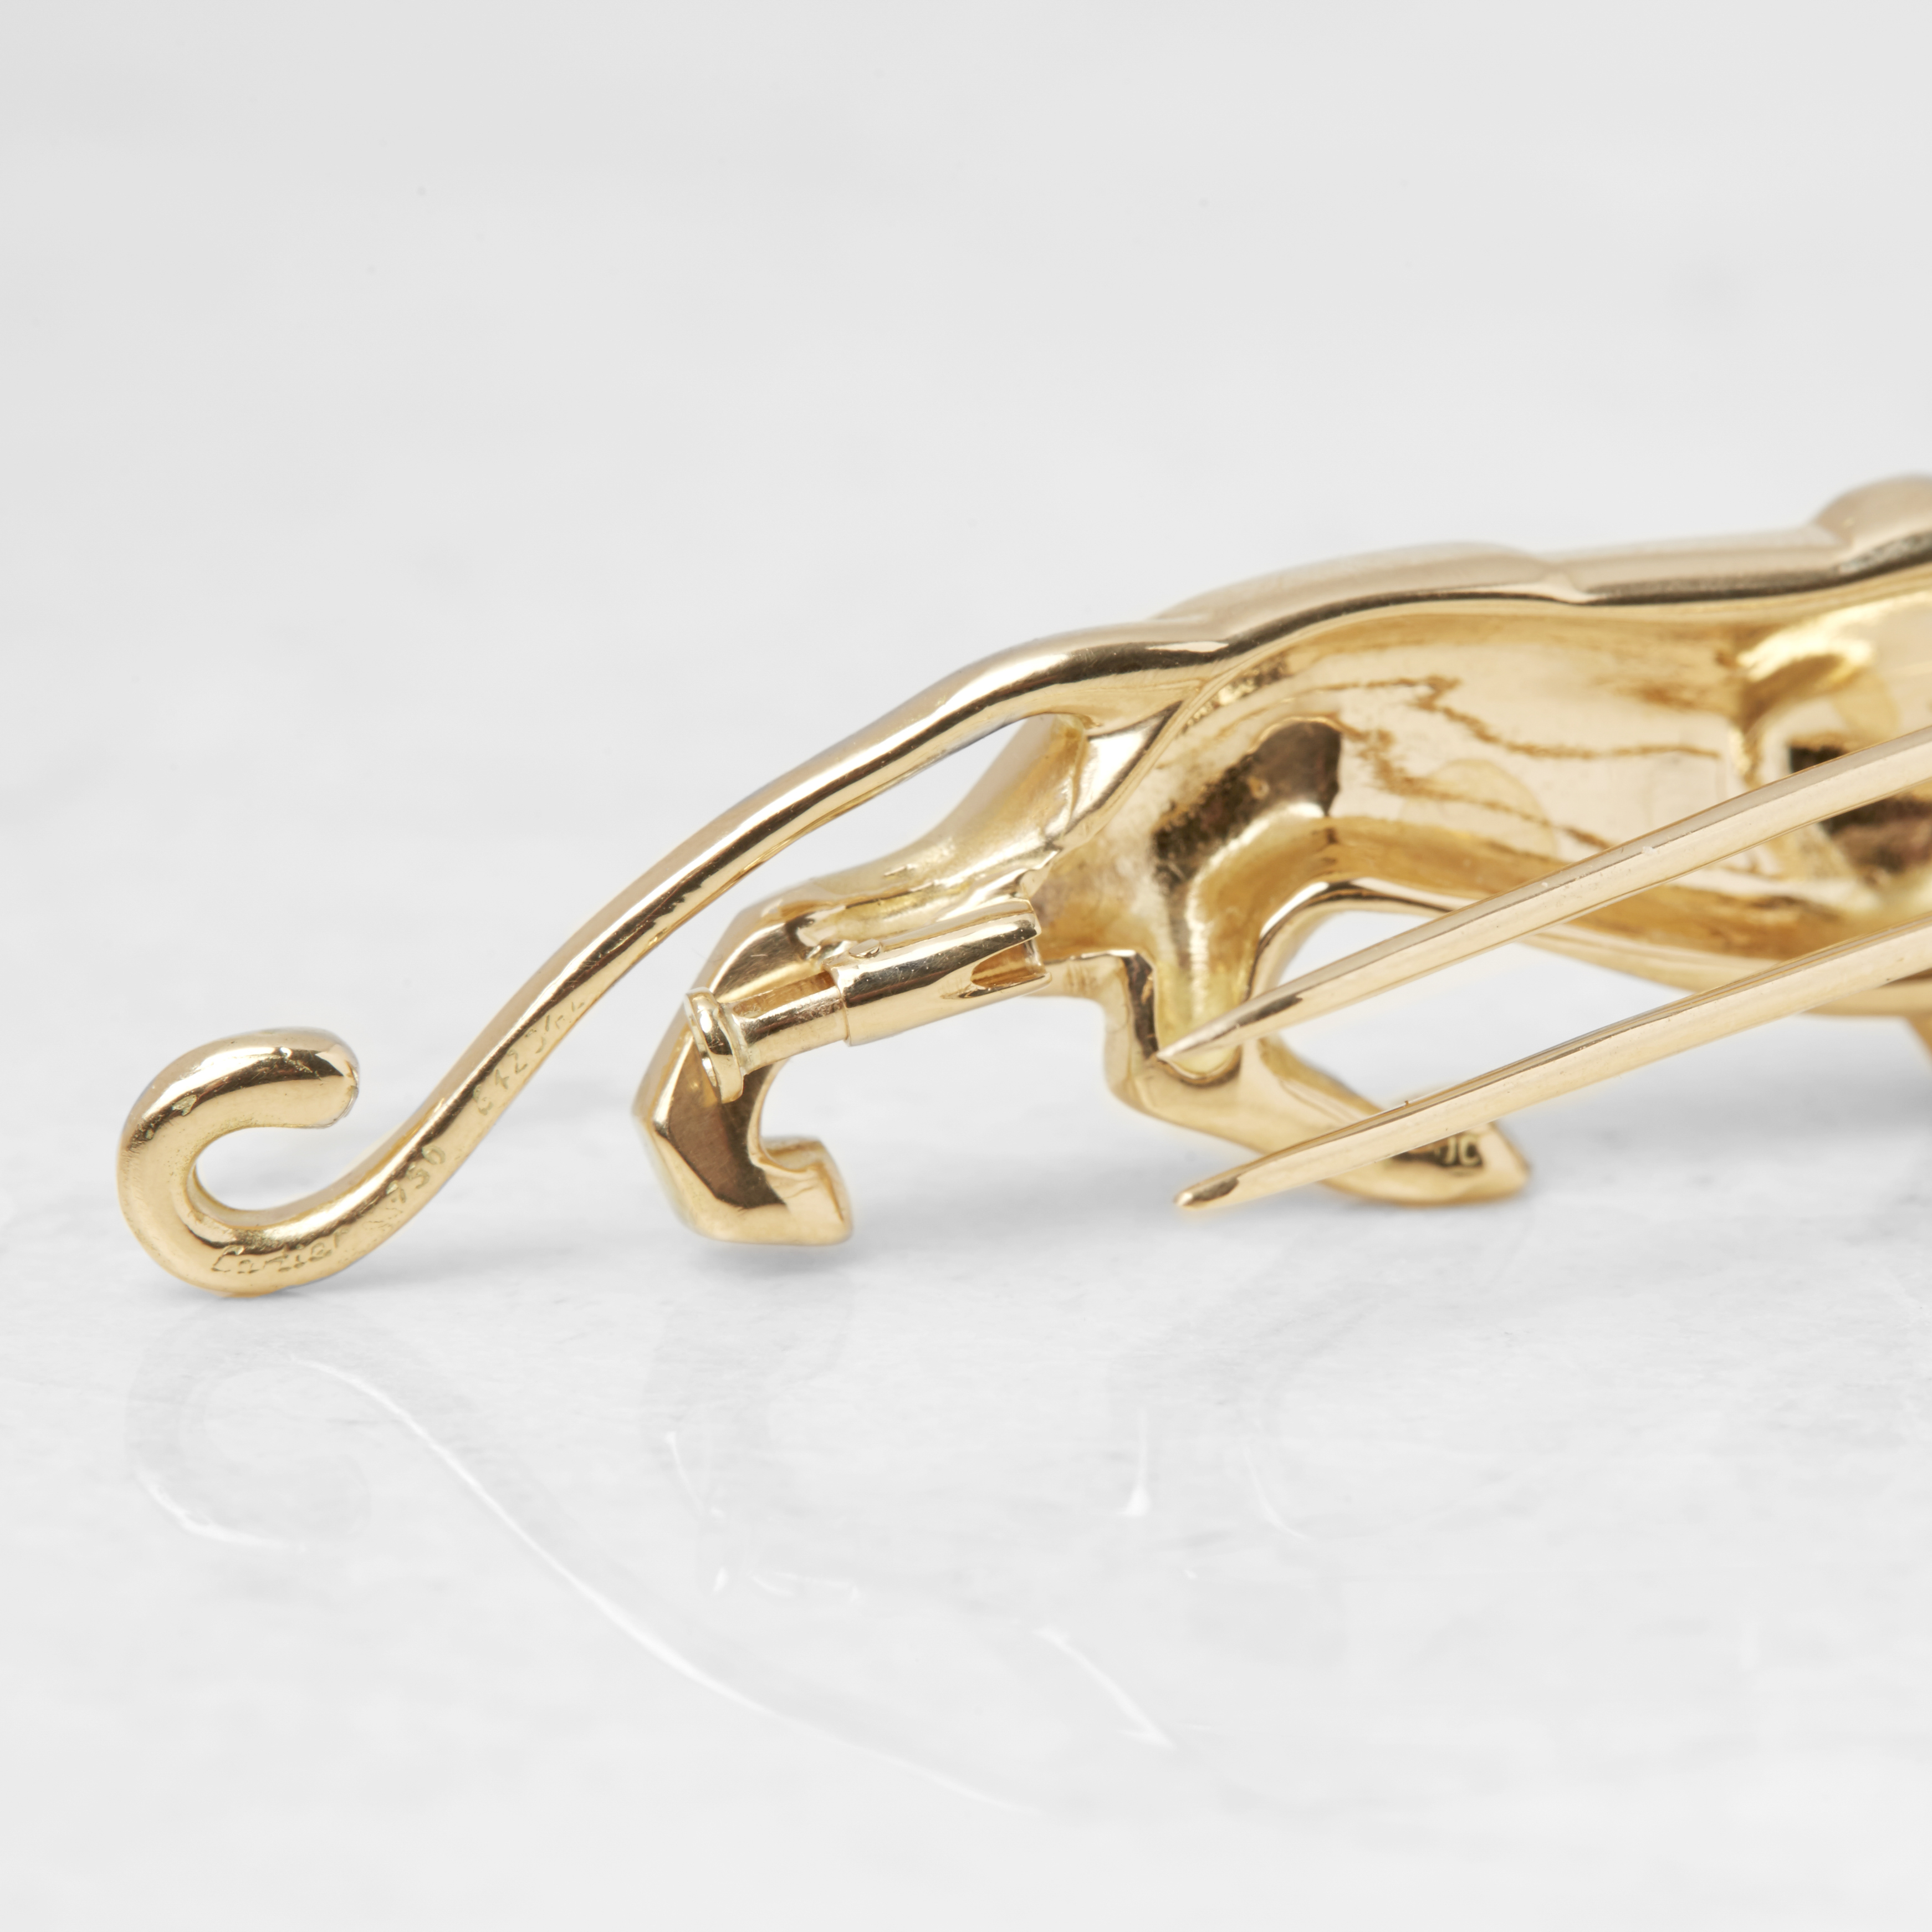 Cartier, 18k Yellow Gold Panthère Brooch - Image 6 of 9